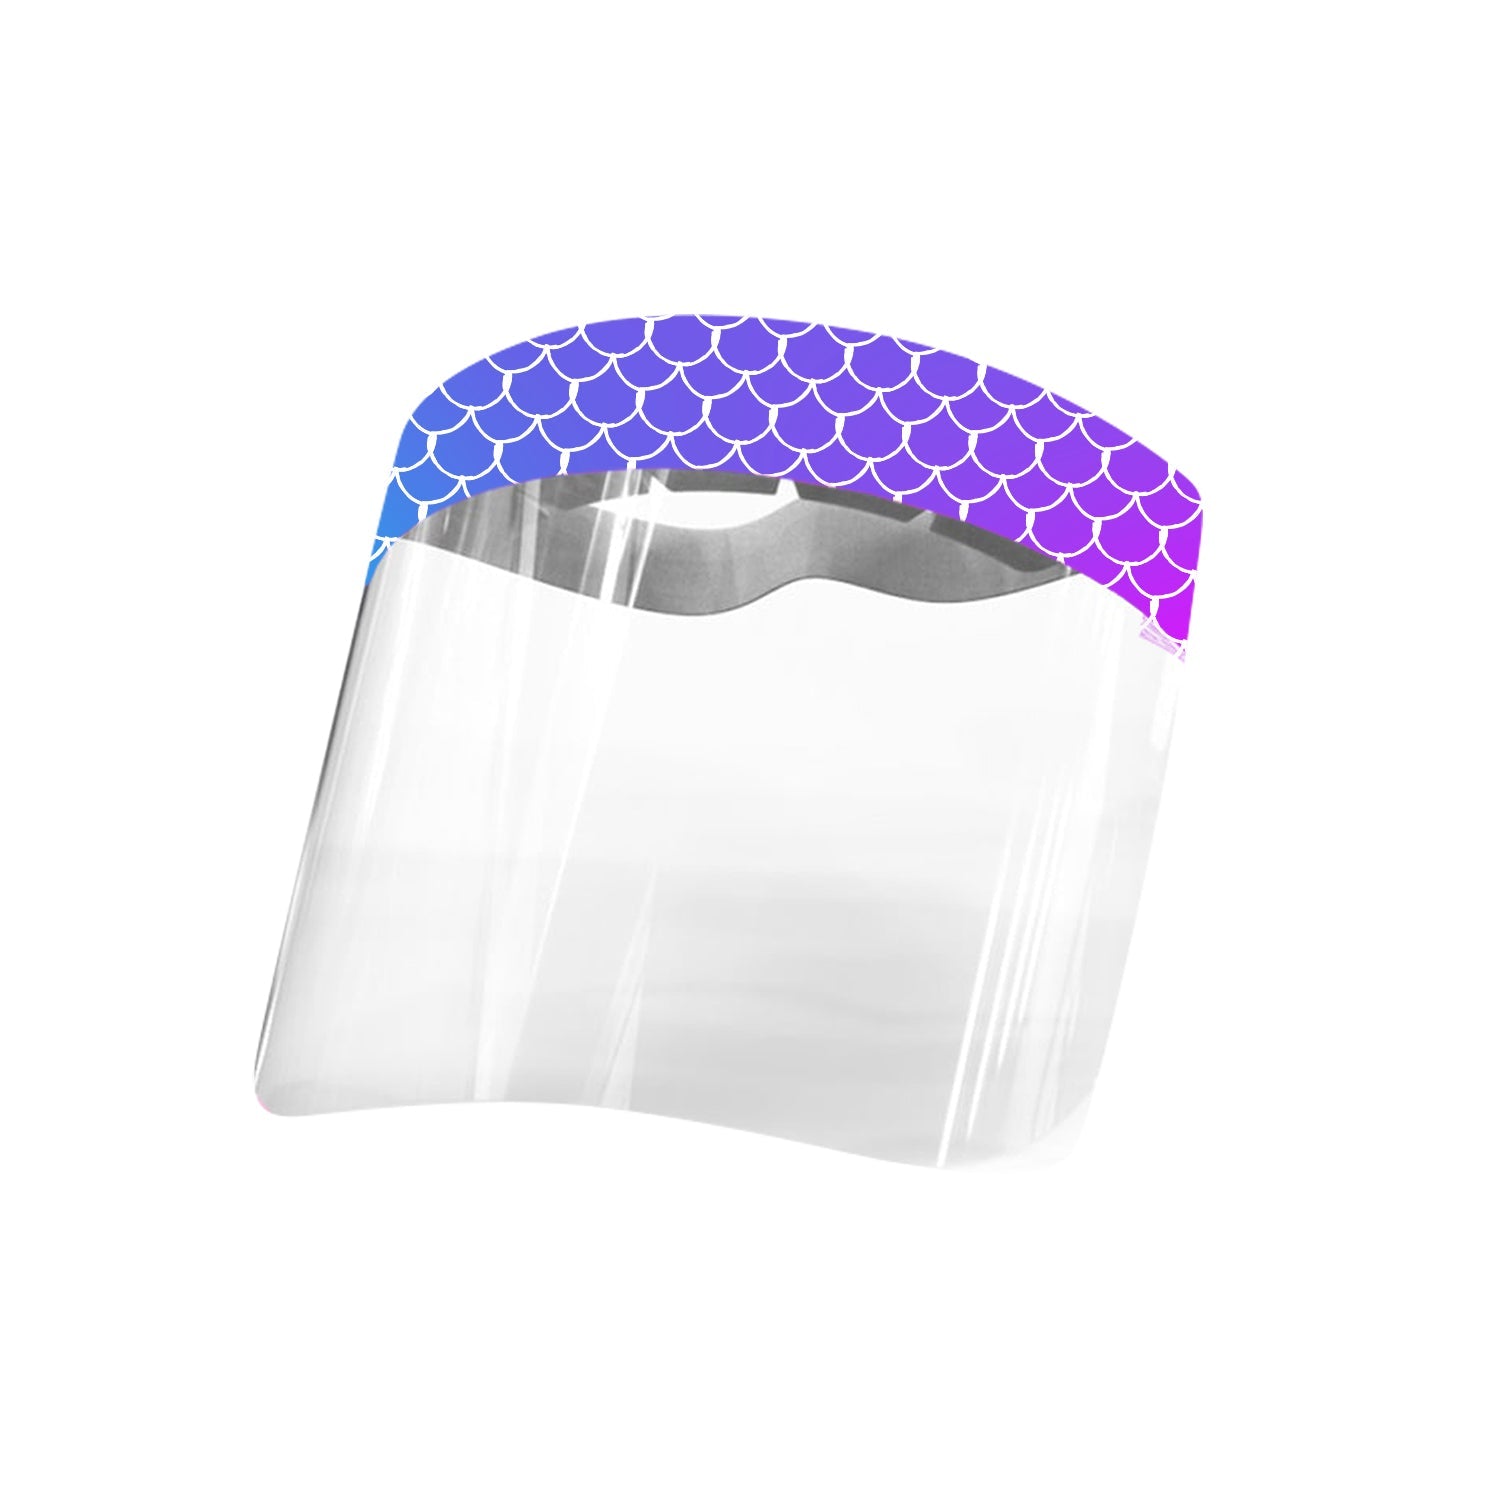 High quality face shields designed to stop any droplets from coughs or sneezes! Keep you and your family protected! Comfortable, Durable, Quality Material. Comes with removable protective liner. Easy To Clean.  Comes with adjustable strap. Crystal clear transparency. Lightweight for tweens, teens and young adults. Mermaid design.